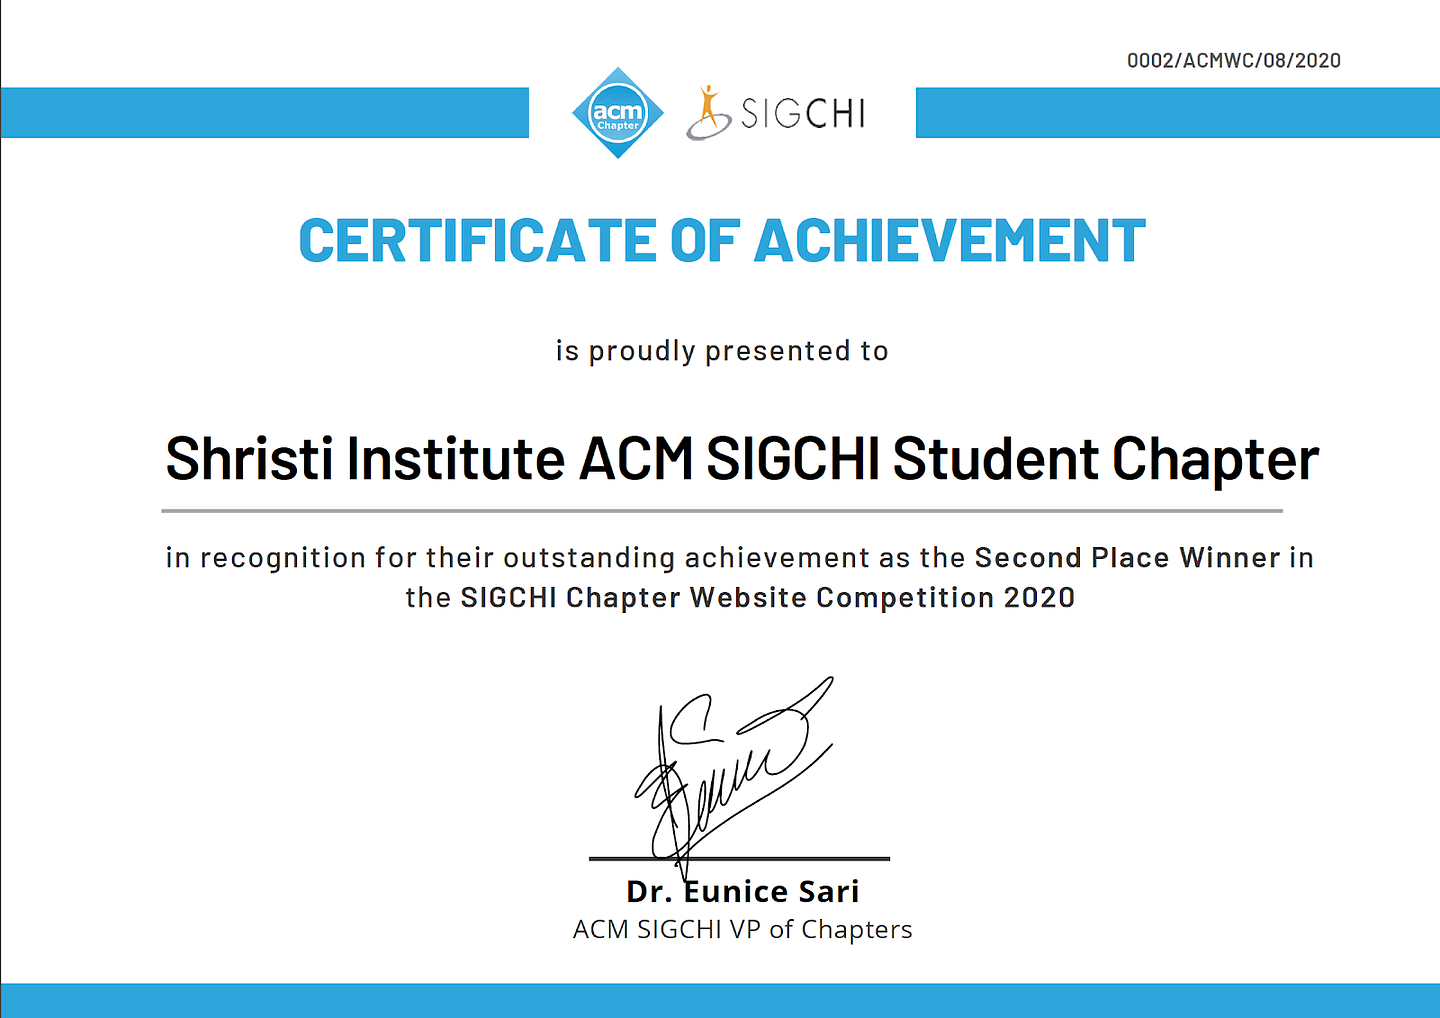 Second Place Winner Certificate of Achievement for Shristi Institute ACM SIGCHI Student Chapter